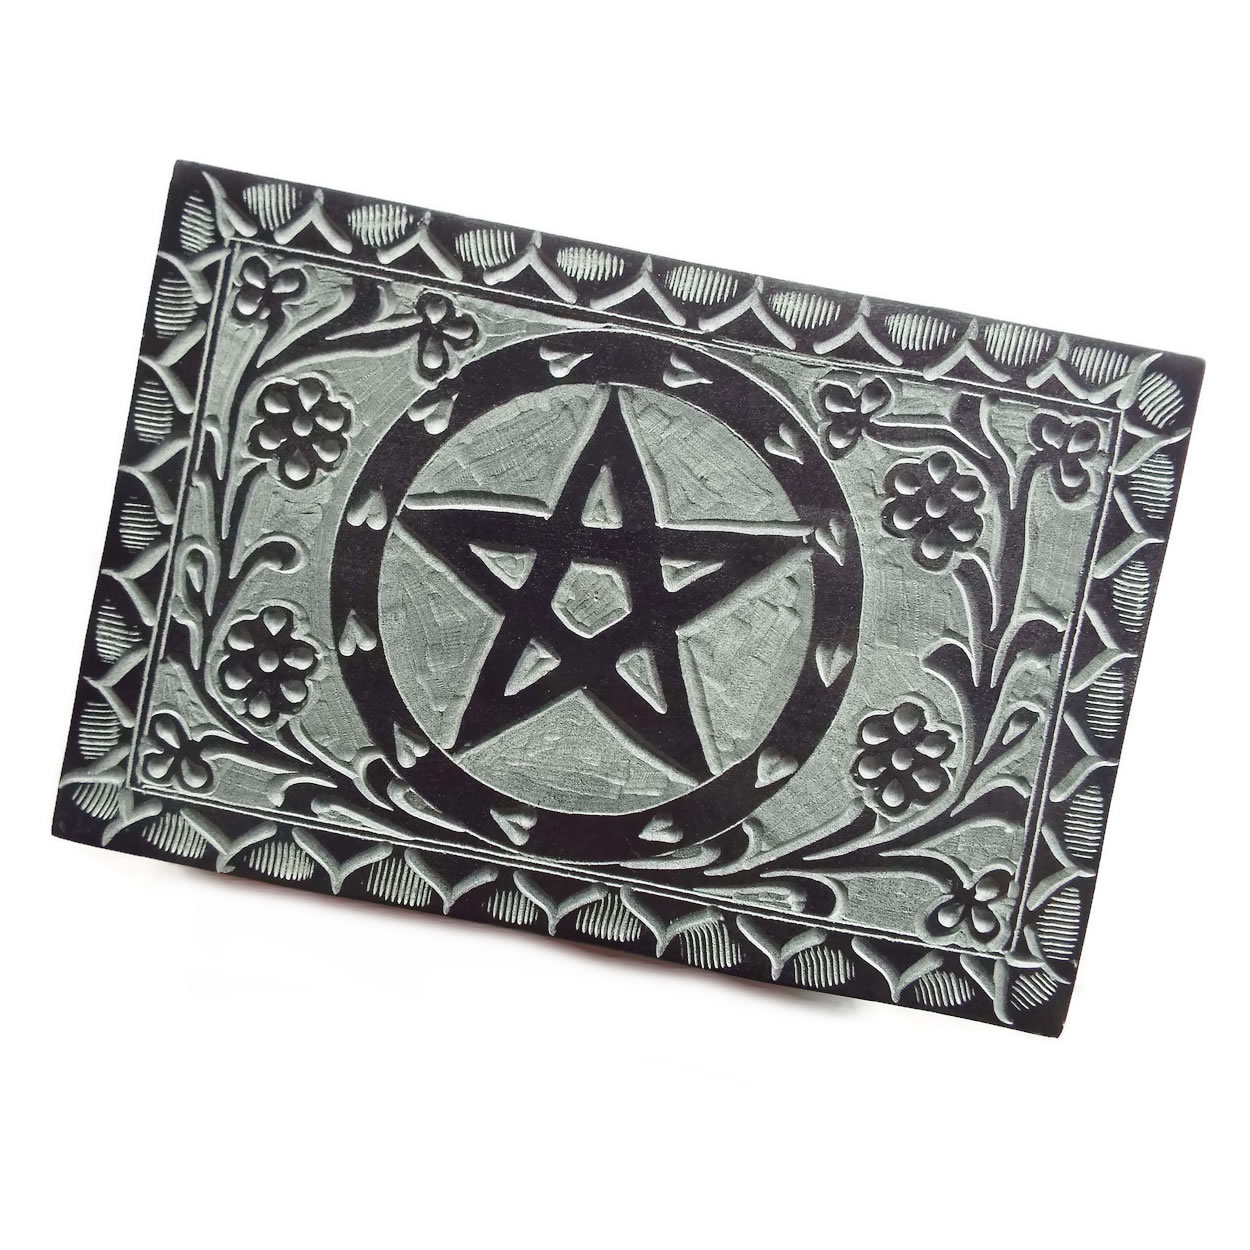 Black Soapstone Carved Box with Pentacle Top View